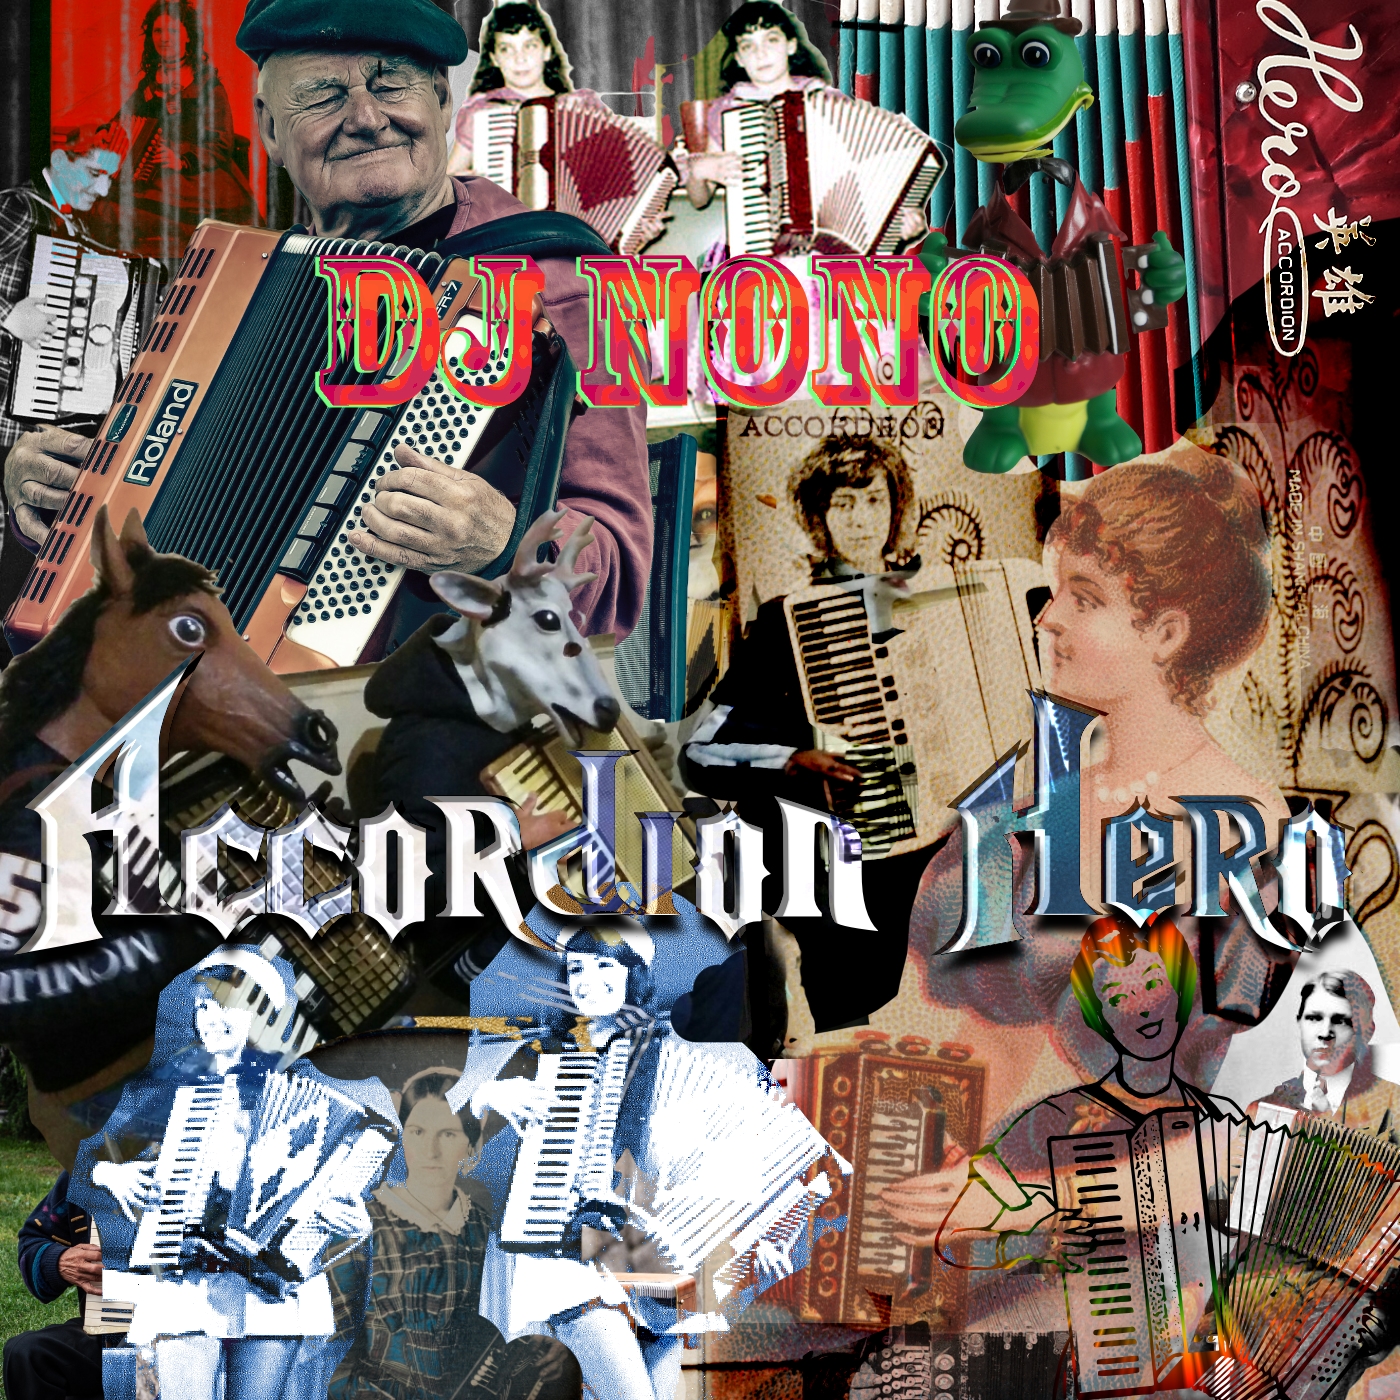 Accordion Hero - Radio Clash Podcast DJNoNo's First Album - Accordion Hero Radio Clash Music Mashup Podcast brings you the best in eclectic tunes, mashups and remixes from around the world. Since 2004, we've been bringing you the freshest and most innovative music from a diverse range of genres and cultures. Join us on our musical journey as we explore the sounds of yesterday, today, and tomorrow. Discover new music and be inspired by the mashup of musical styles that only Radio Clash can provide. Subscribe now to elevate your musical experience!